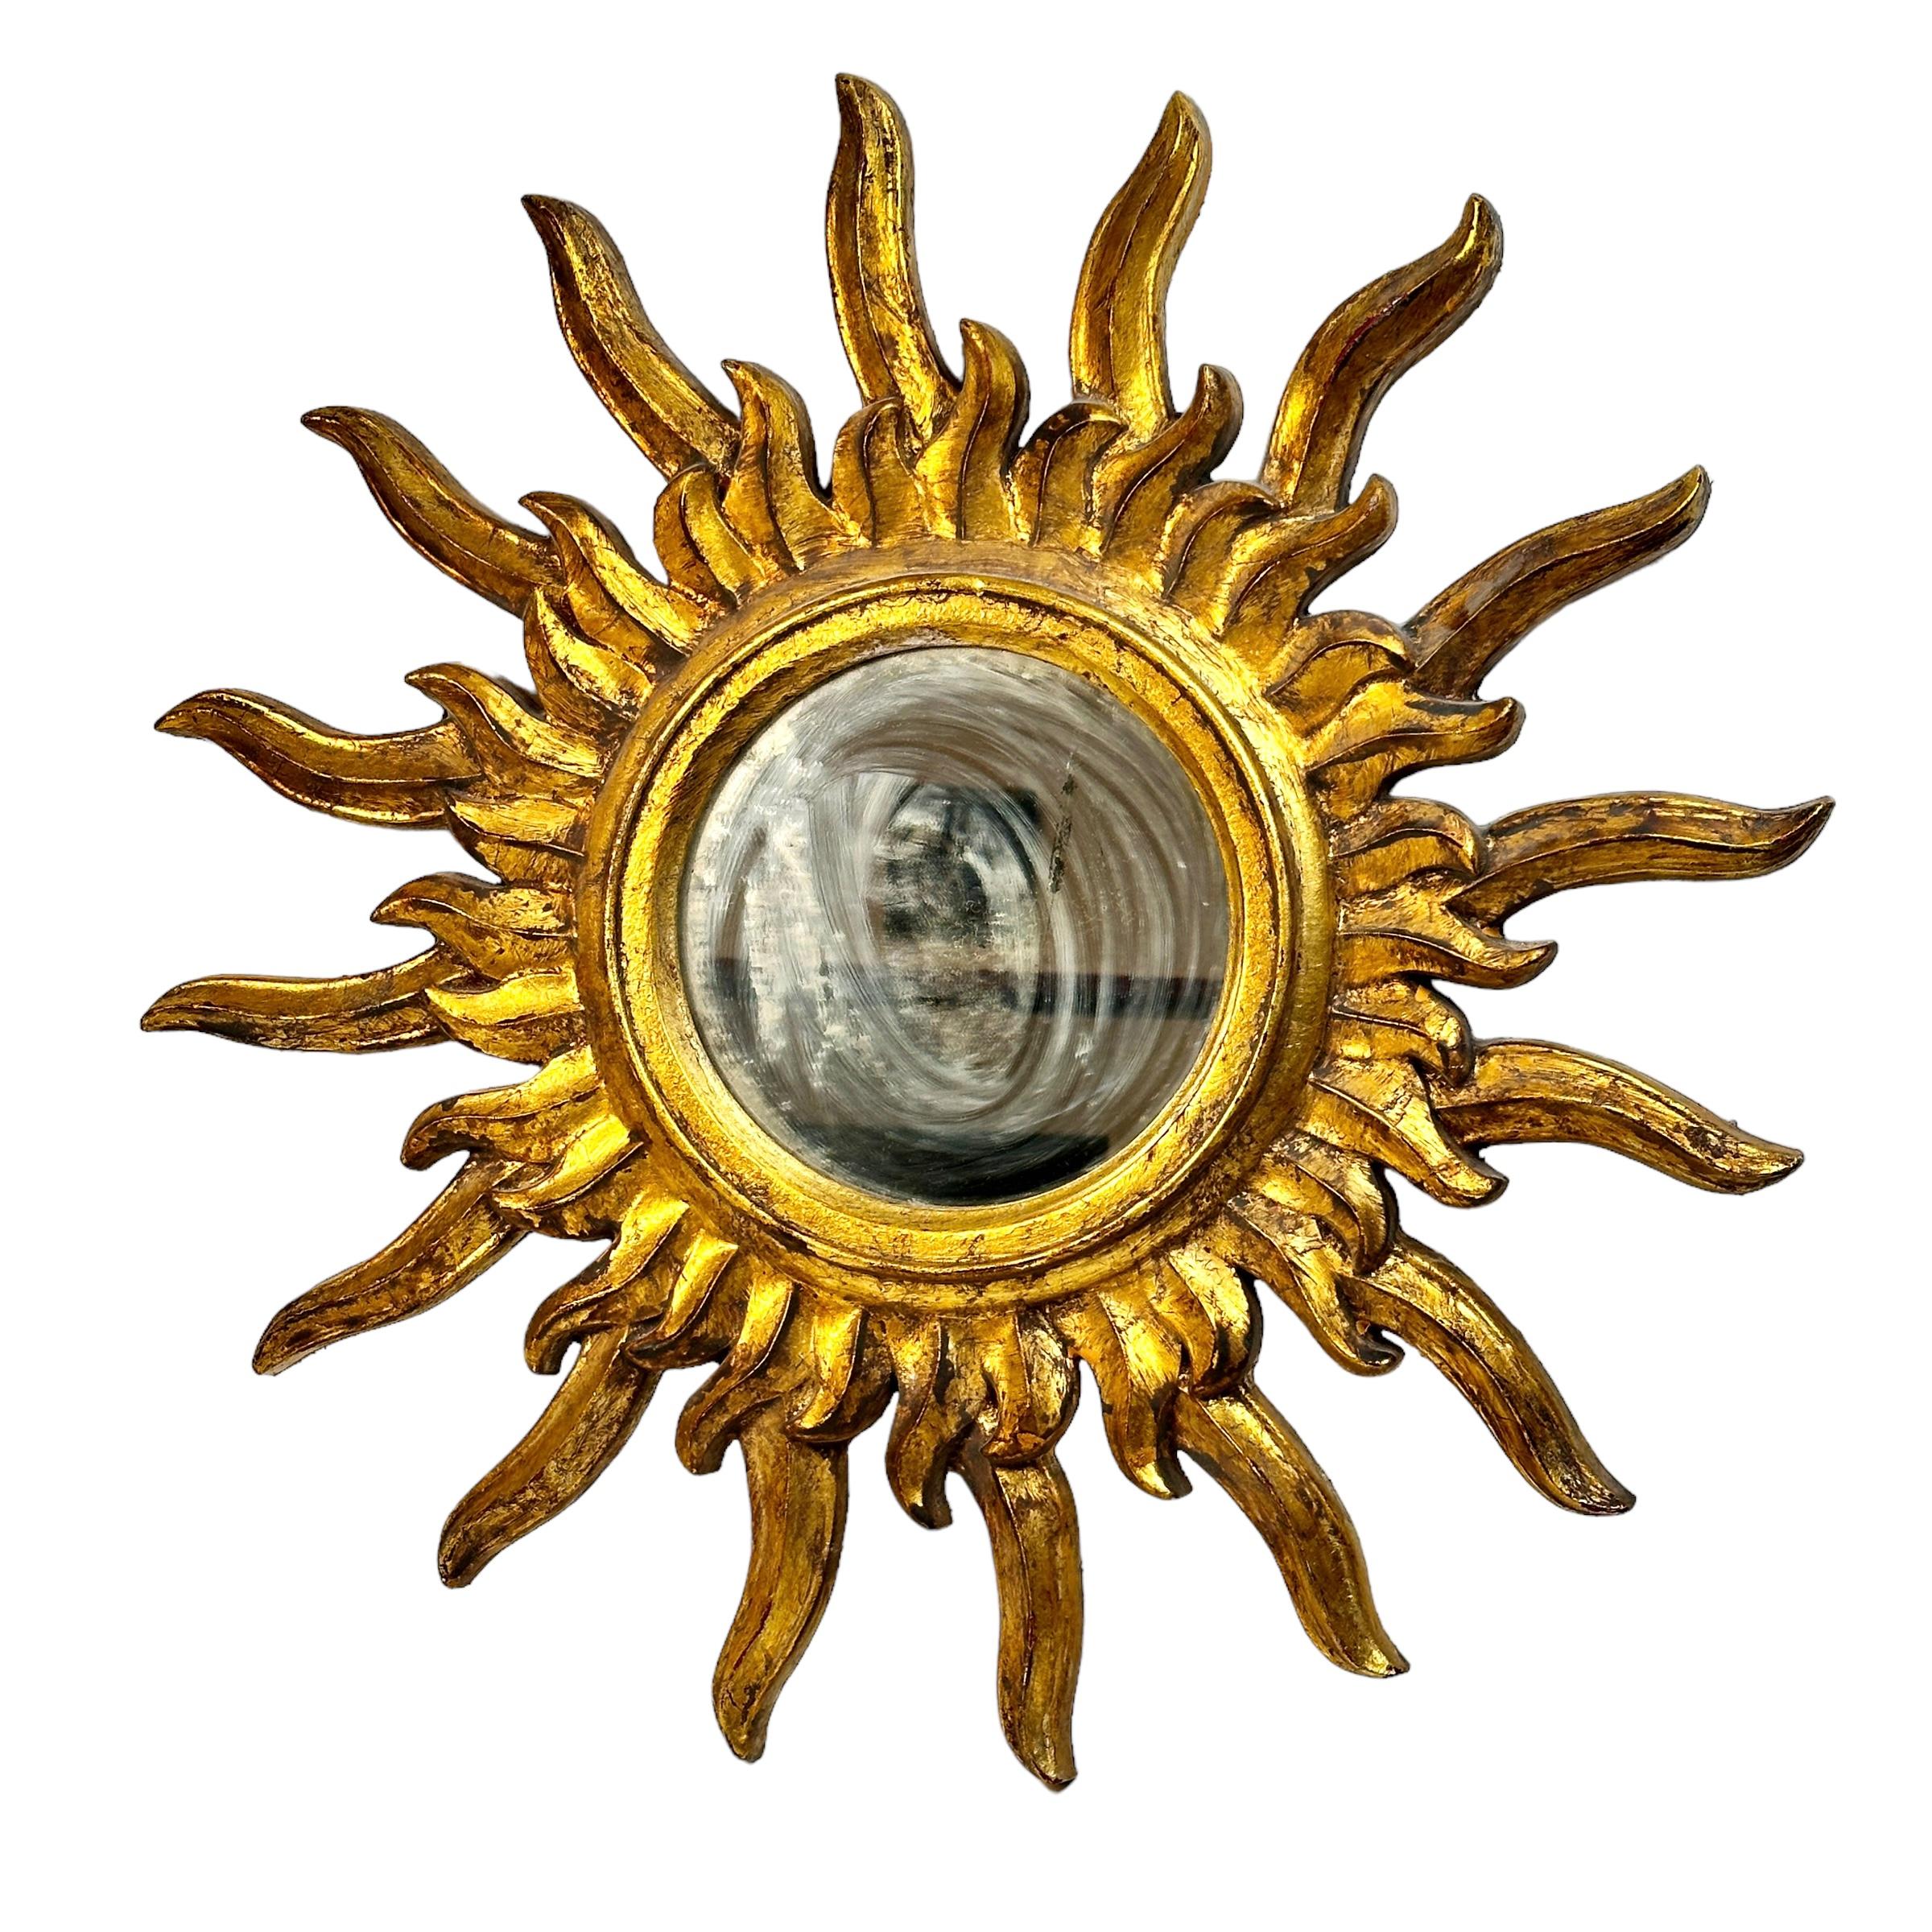 A set of two gorgeous sunburst or starburst mirror. Made of gilded wood. Each measures approximate: 25.75